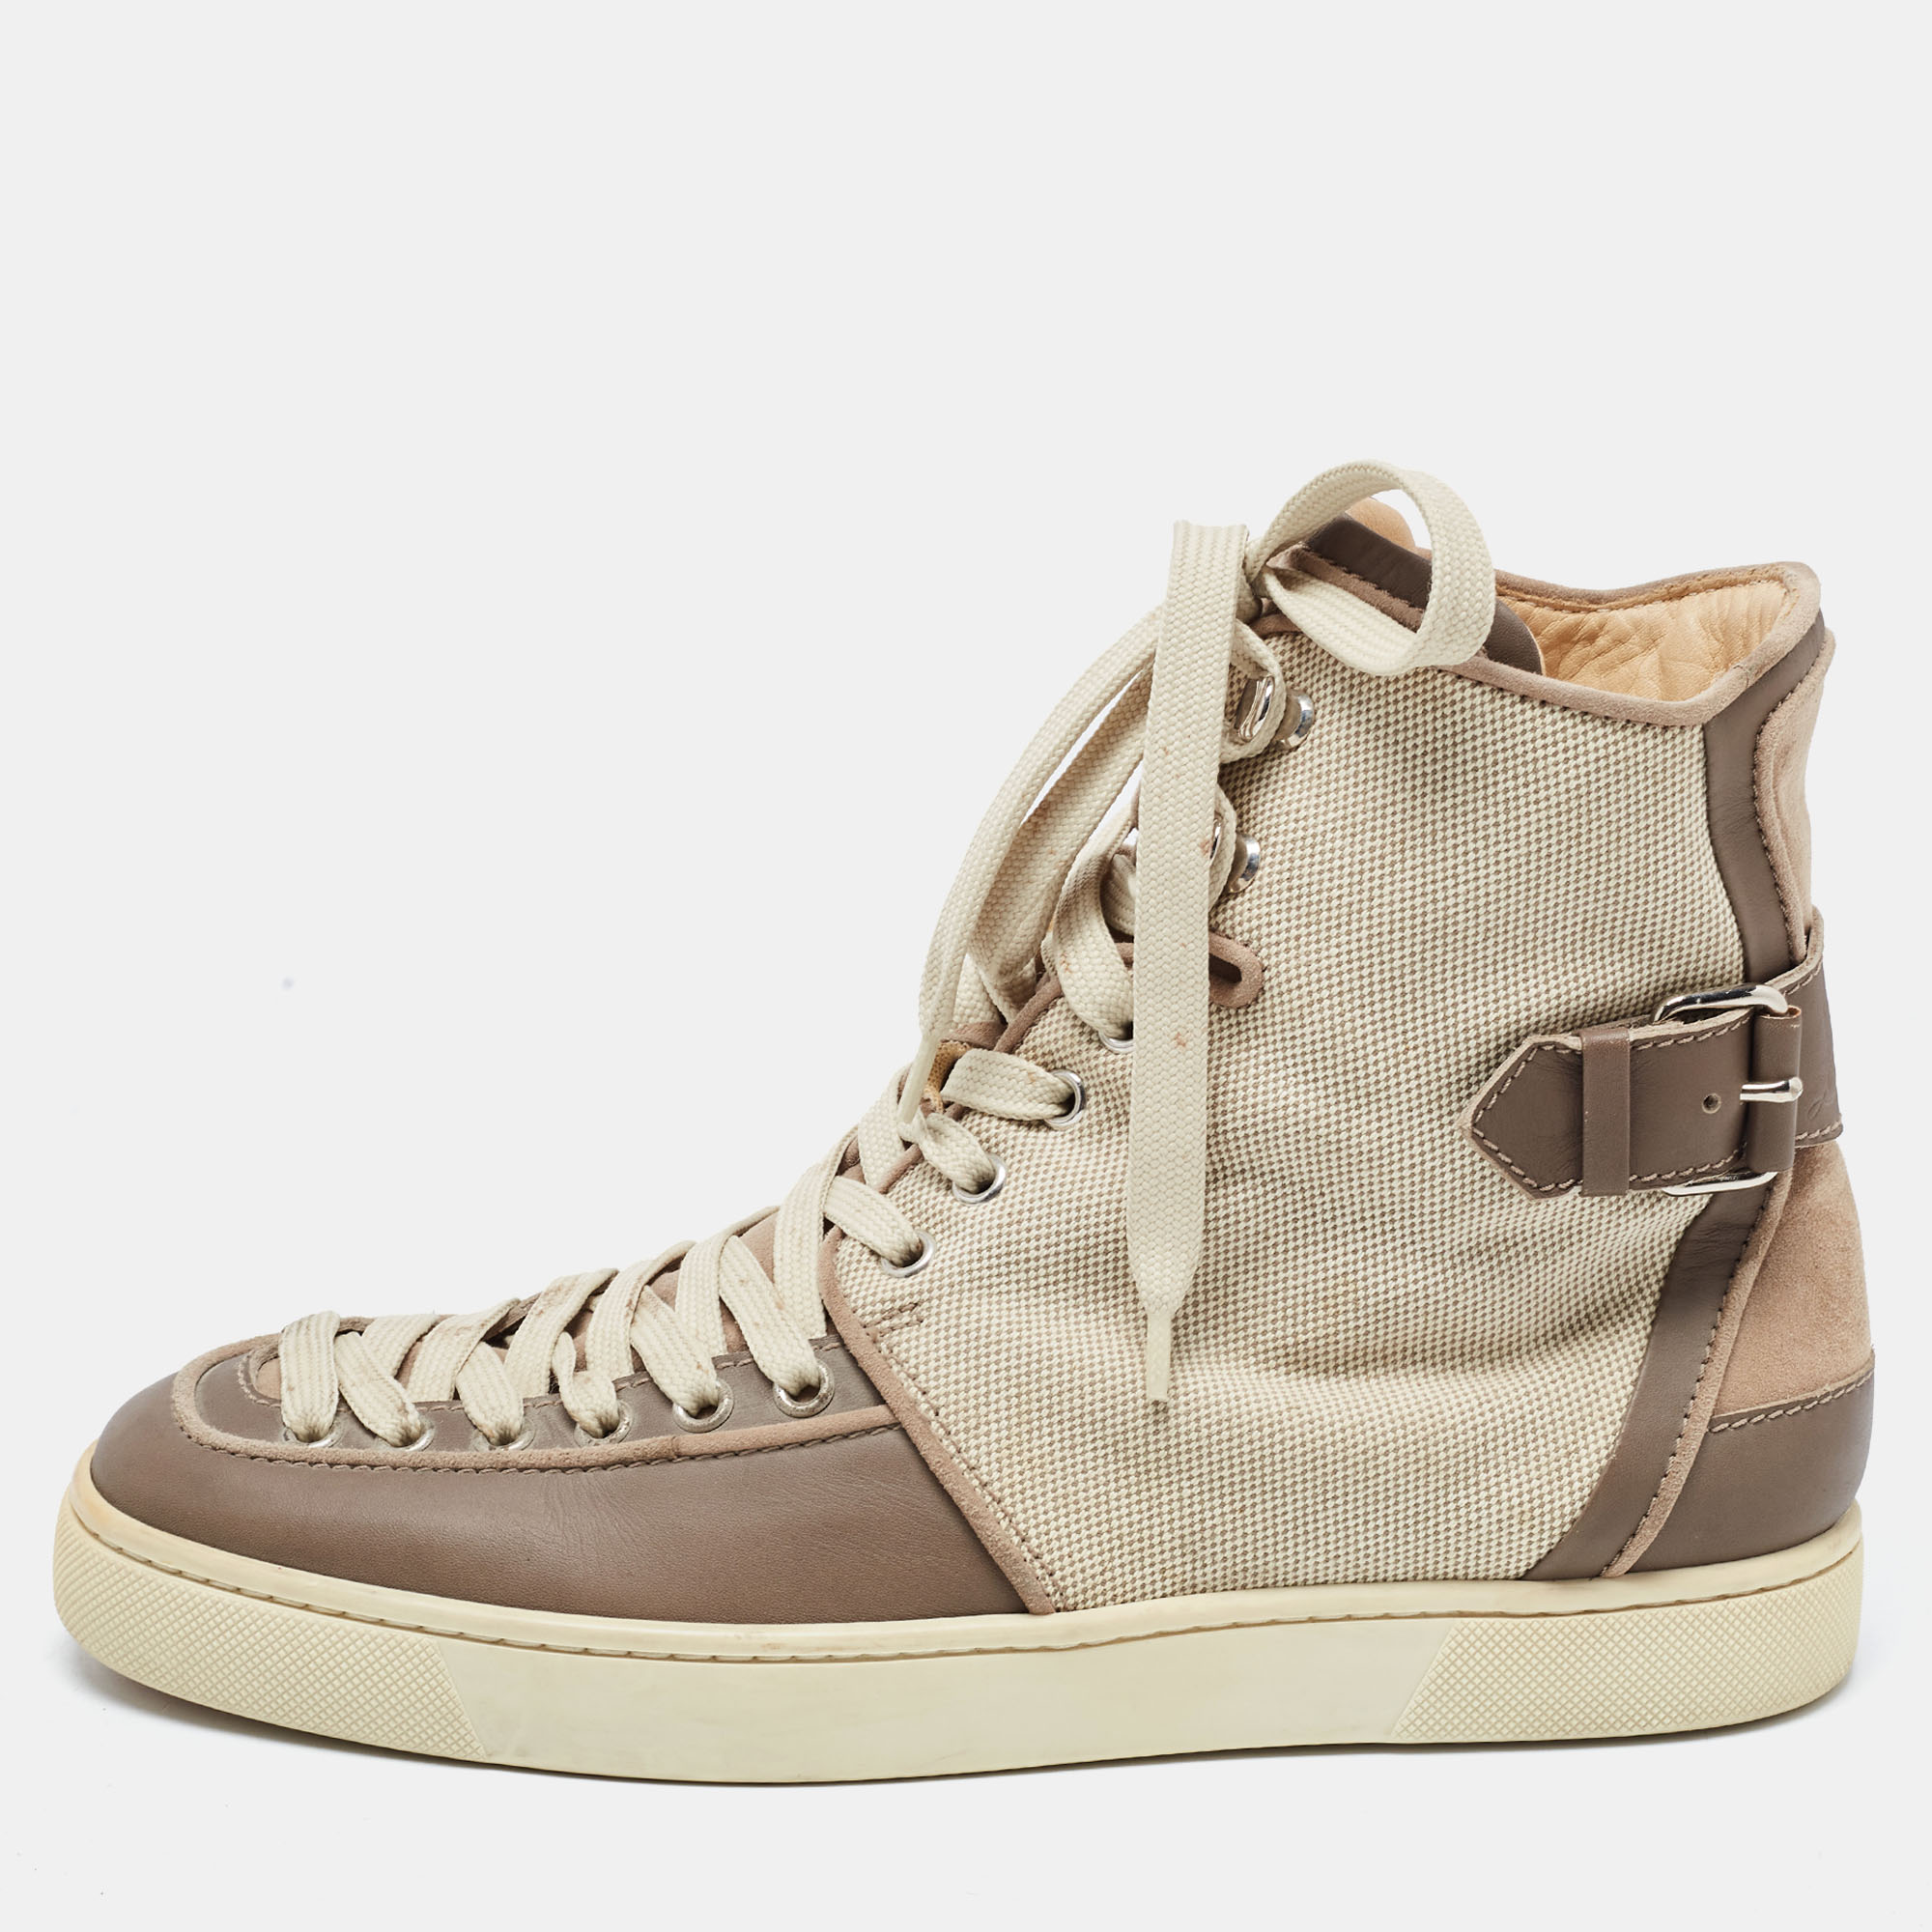 Christian Louboutin Two Tone Canvas And Leather Alfie High Top Sneakers Size 41